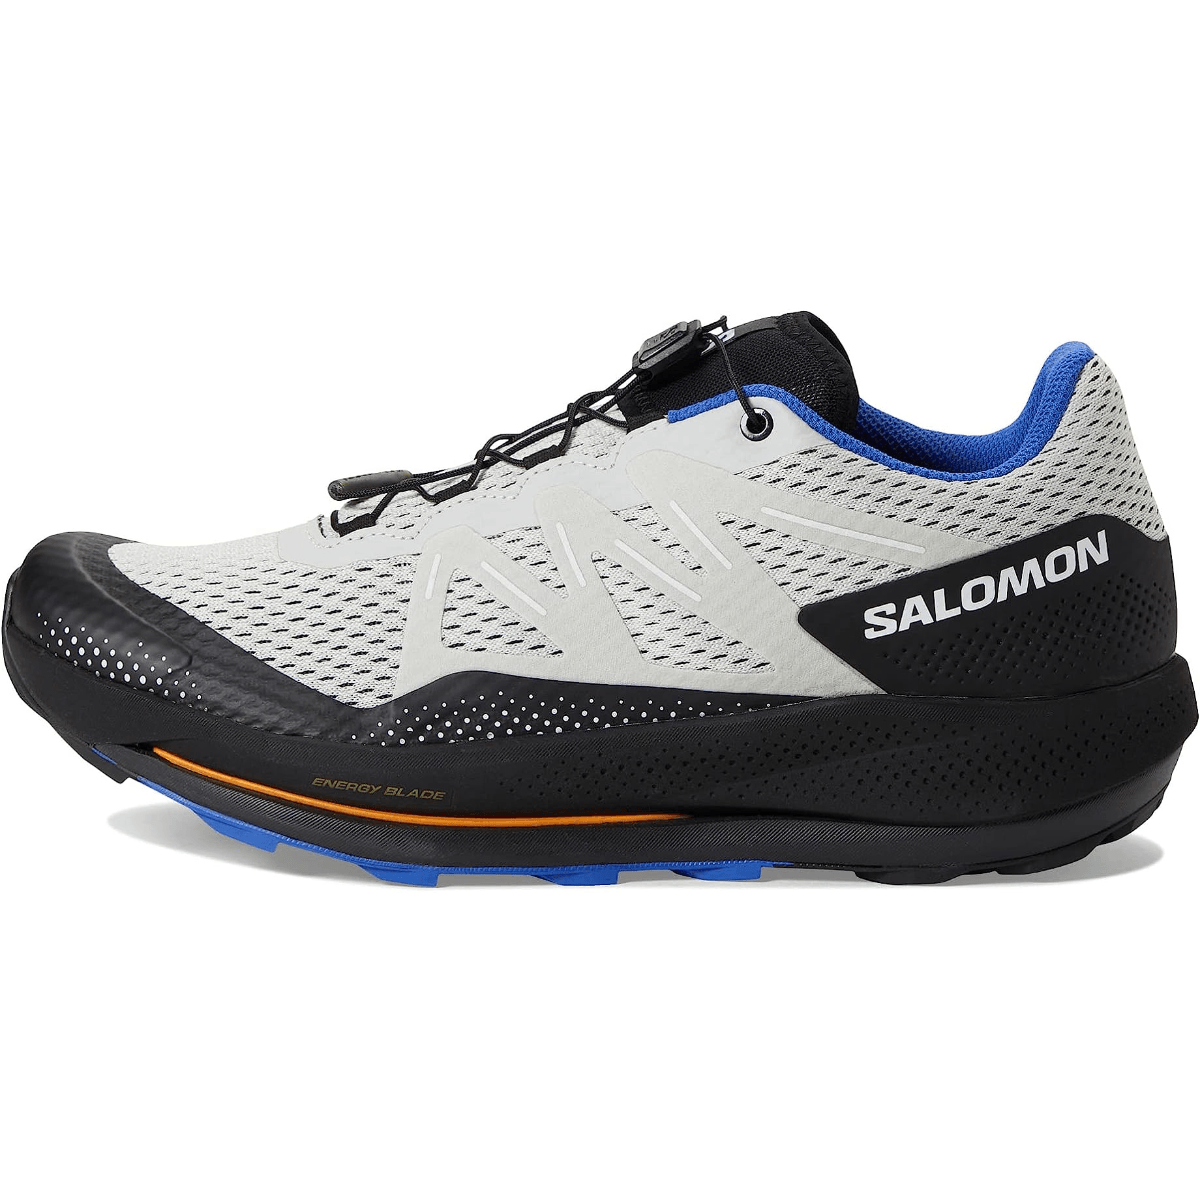 Pulsar Trail Pro 2 - Men's Trail Running Shoes